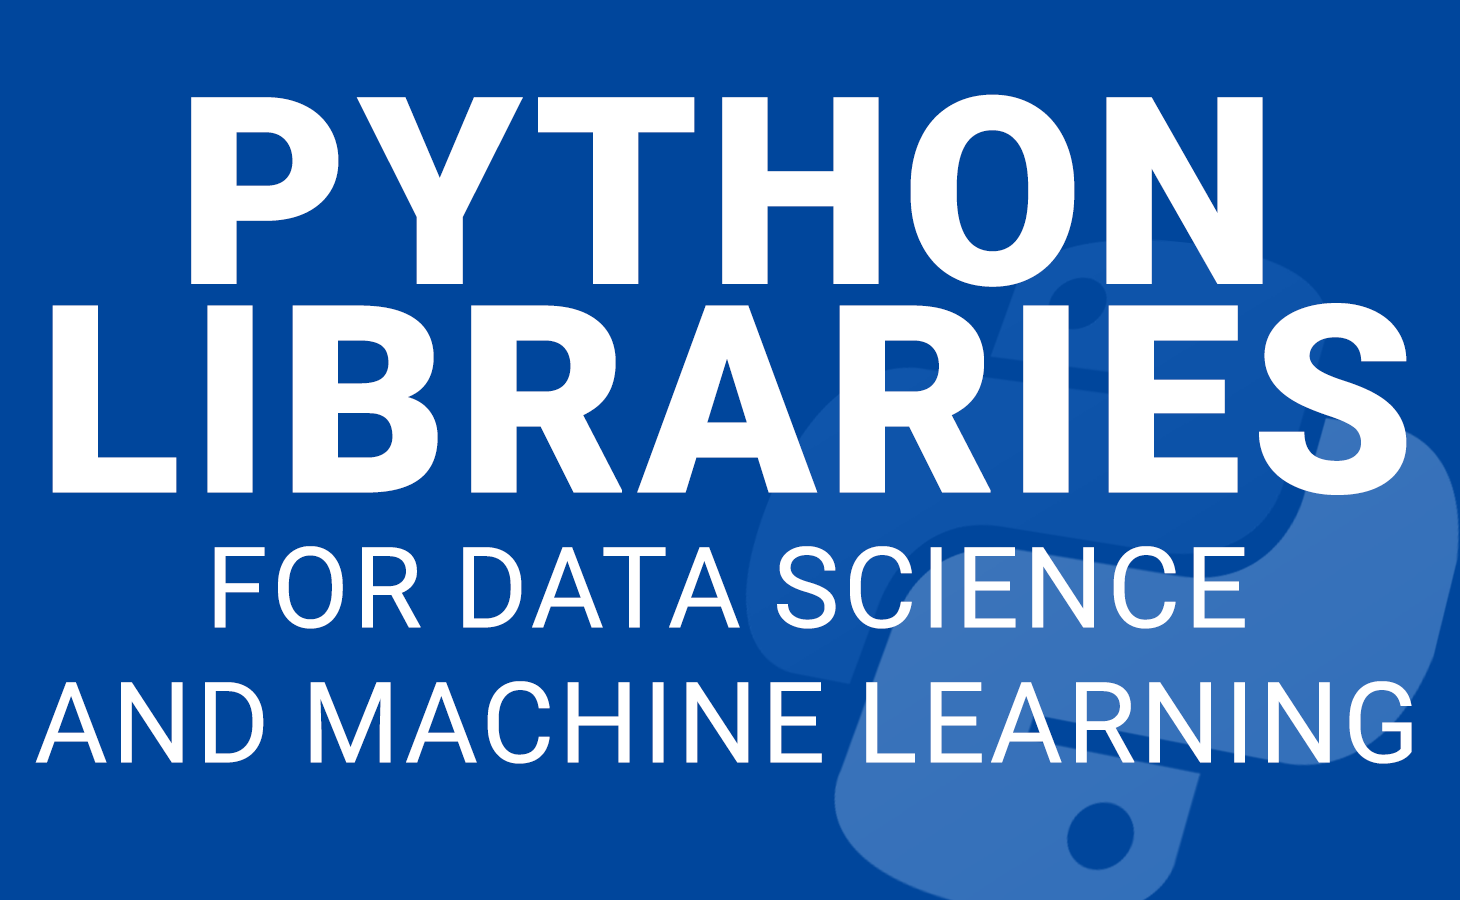 Top 10 Python Libraries for Data Science and Machine Learning